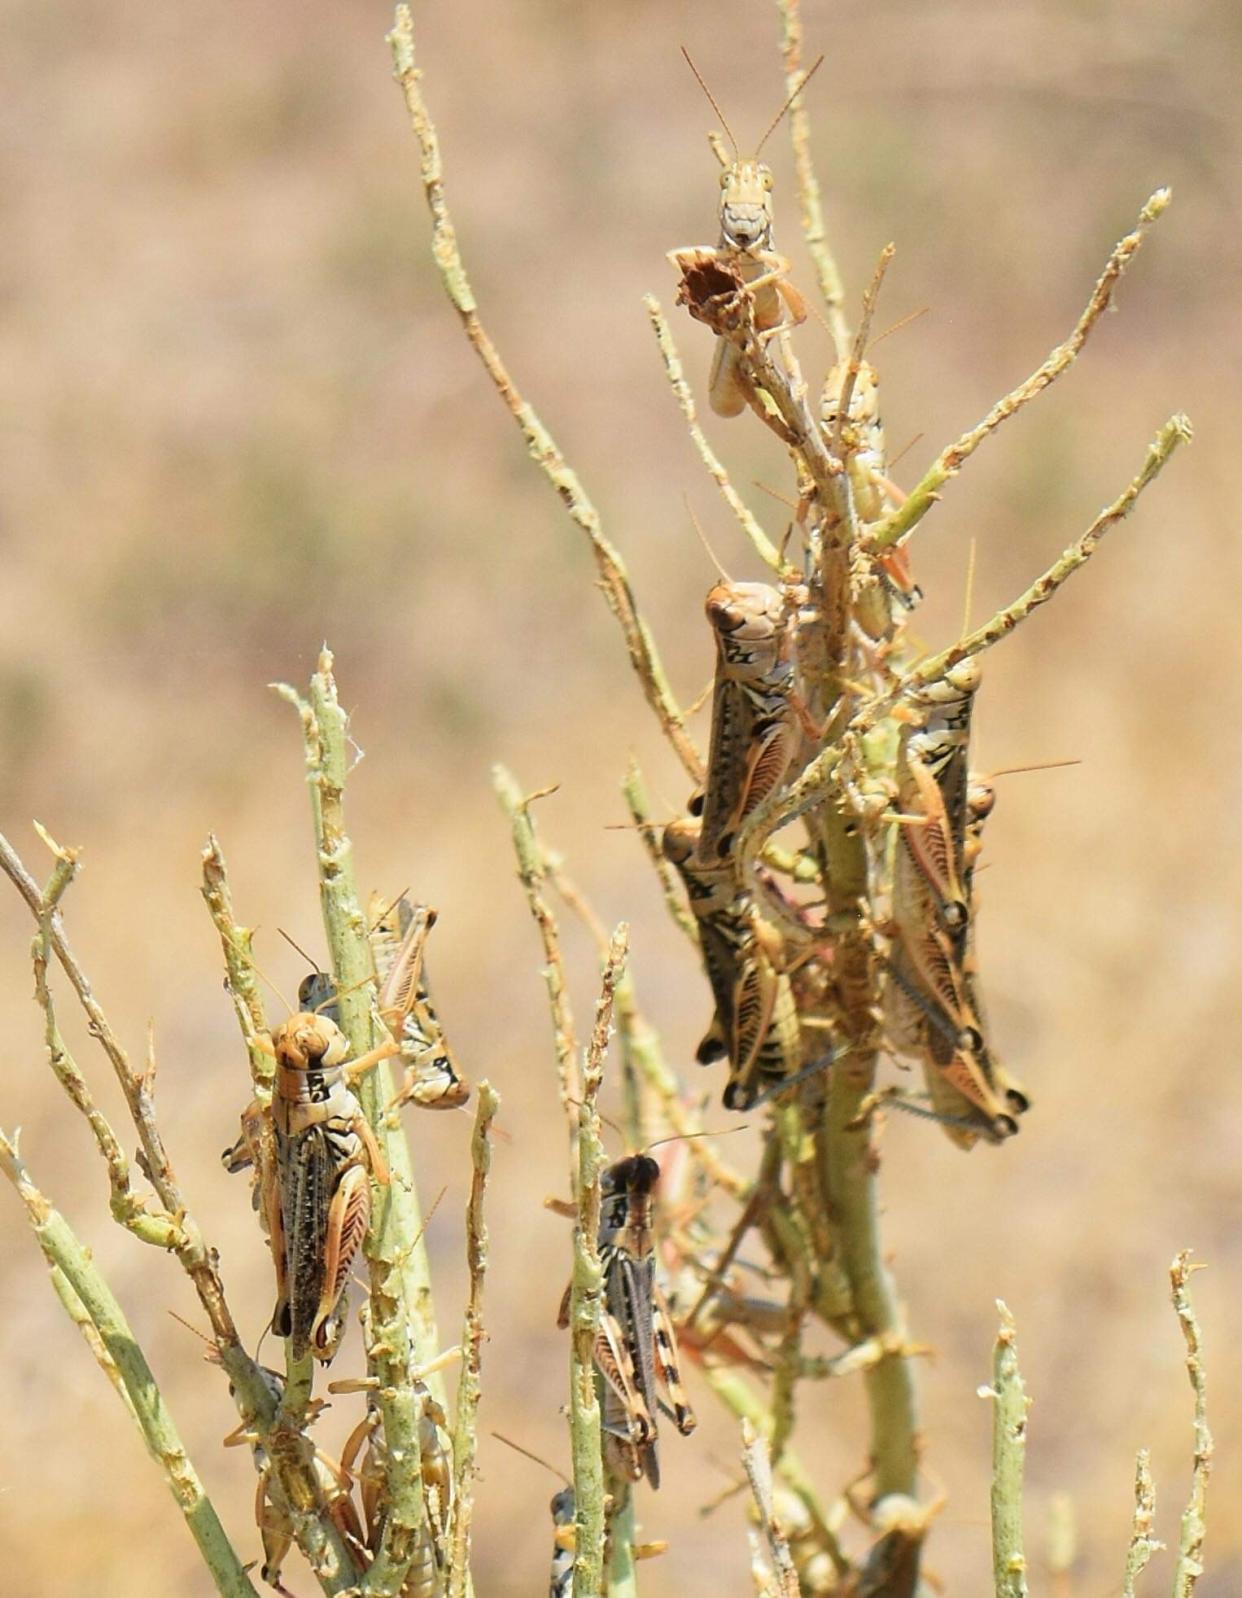 In this photo provided by rancher Diana Fillmore, grasshoppers cover rabbit brush that they've eaten bare on rancher Diana Fillmore's land in Arock, Ore., on July 15, 2021. Farmers in Oregon already battling extreme drought and low water supplies are bracing for another grasshopper and Mormon cricket infestation. Severe outbreaks in recent years, fueled by drier, warmer conditions, have wreaked havoc. (Diana Fillmore via AP)